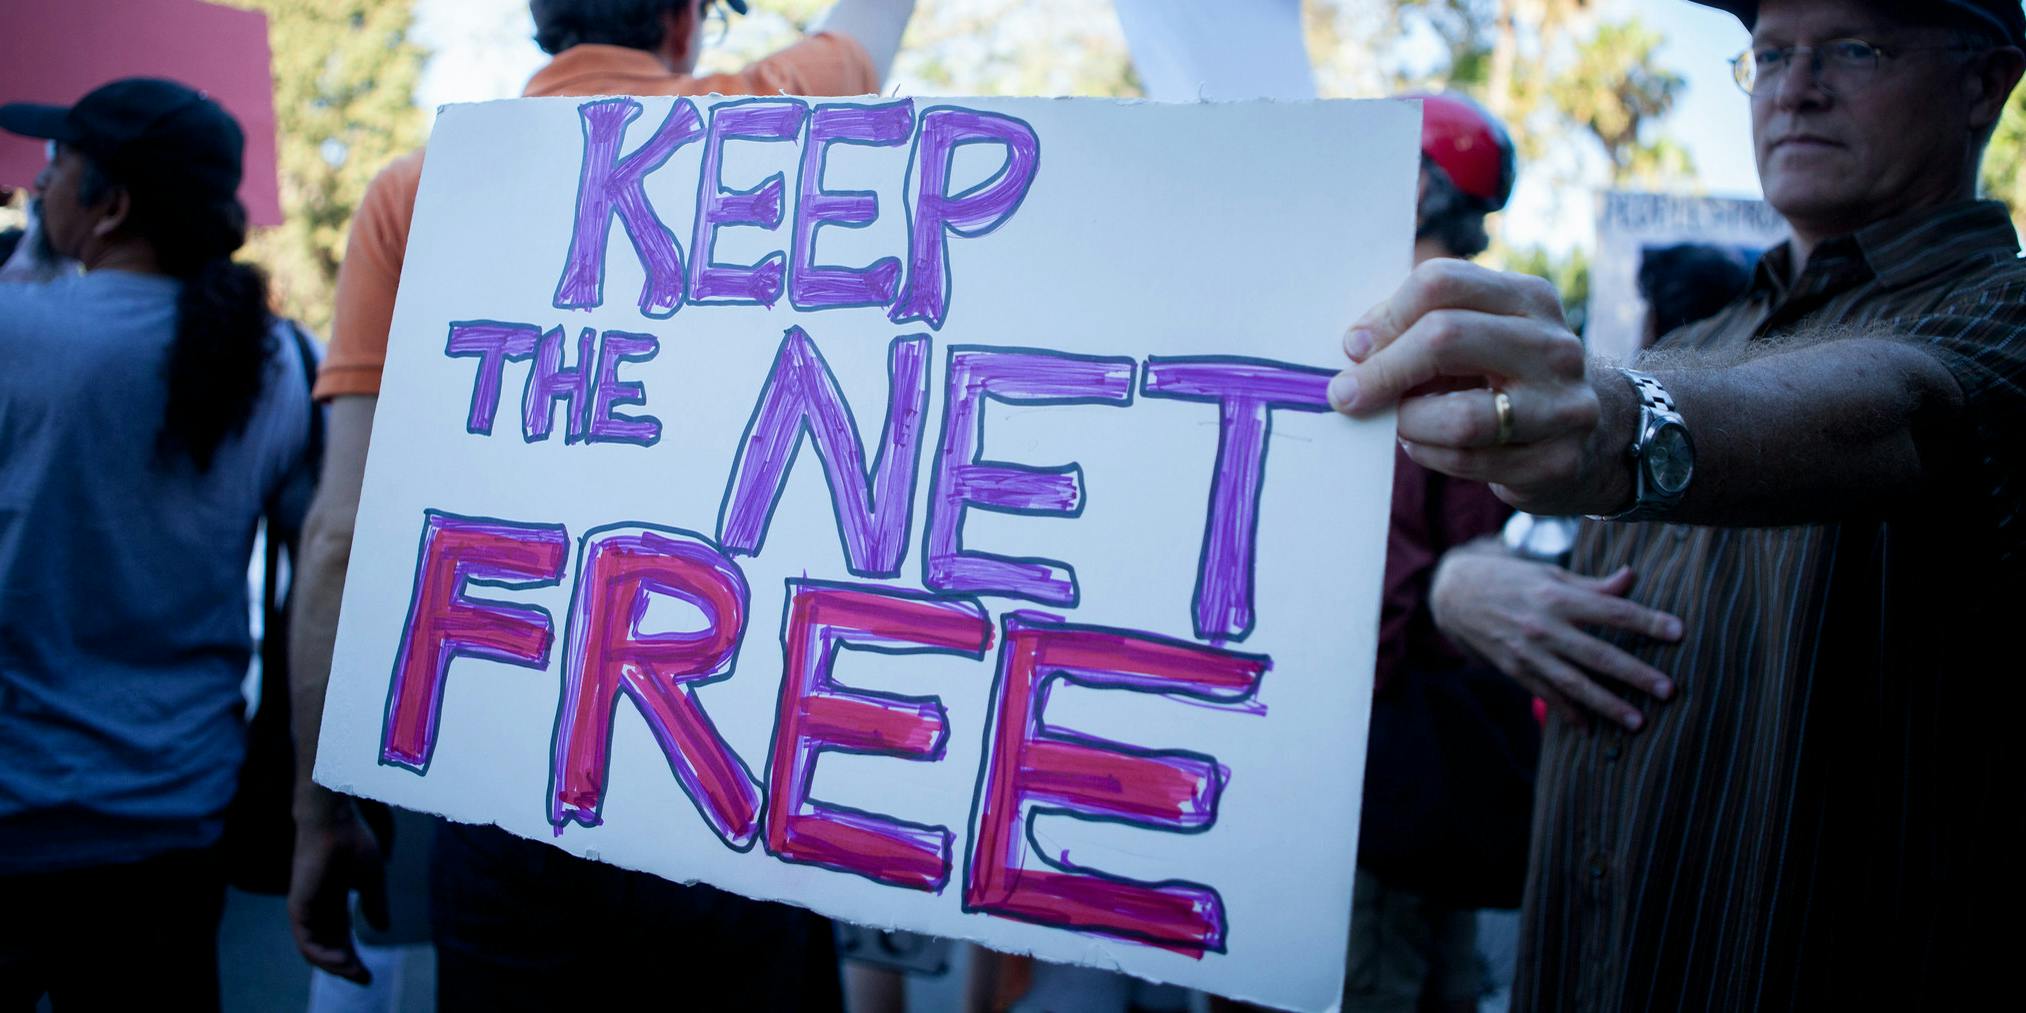 A person protesting in favor of net neutrality, holding a sign that says 'Keep the Net Free'